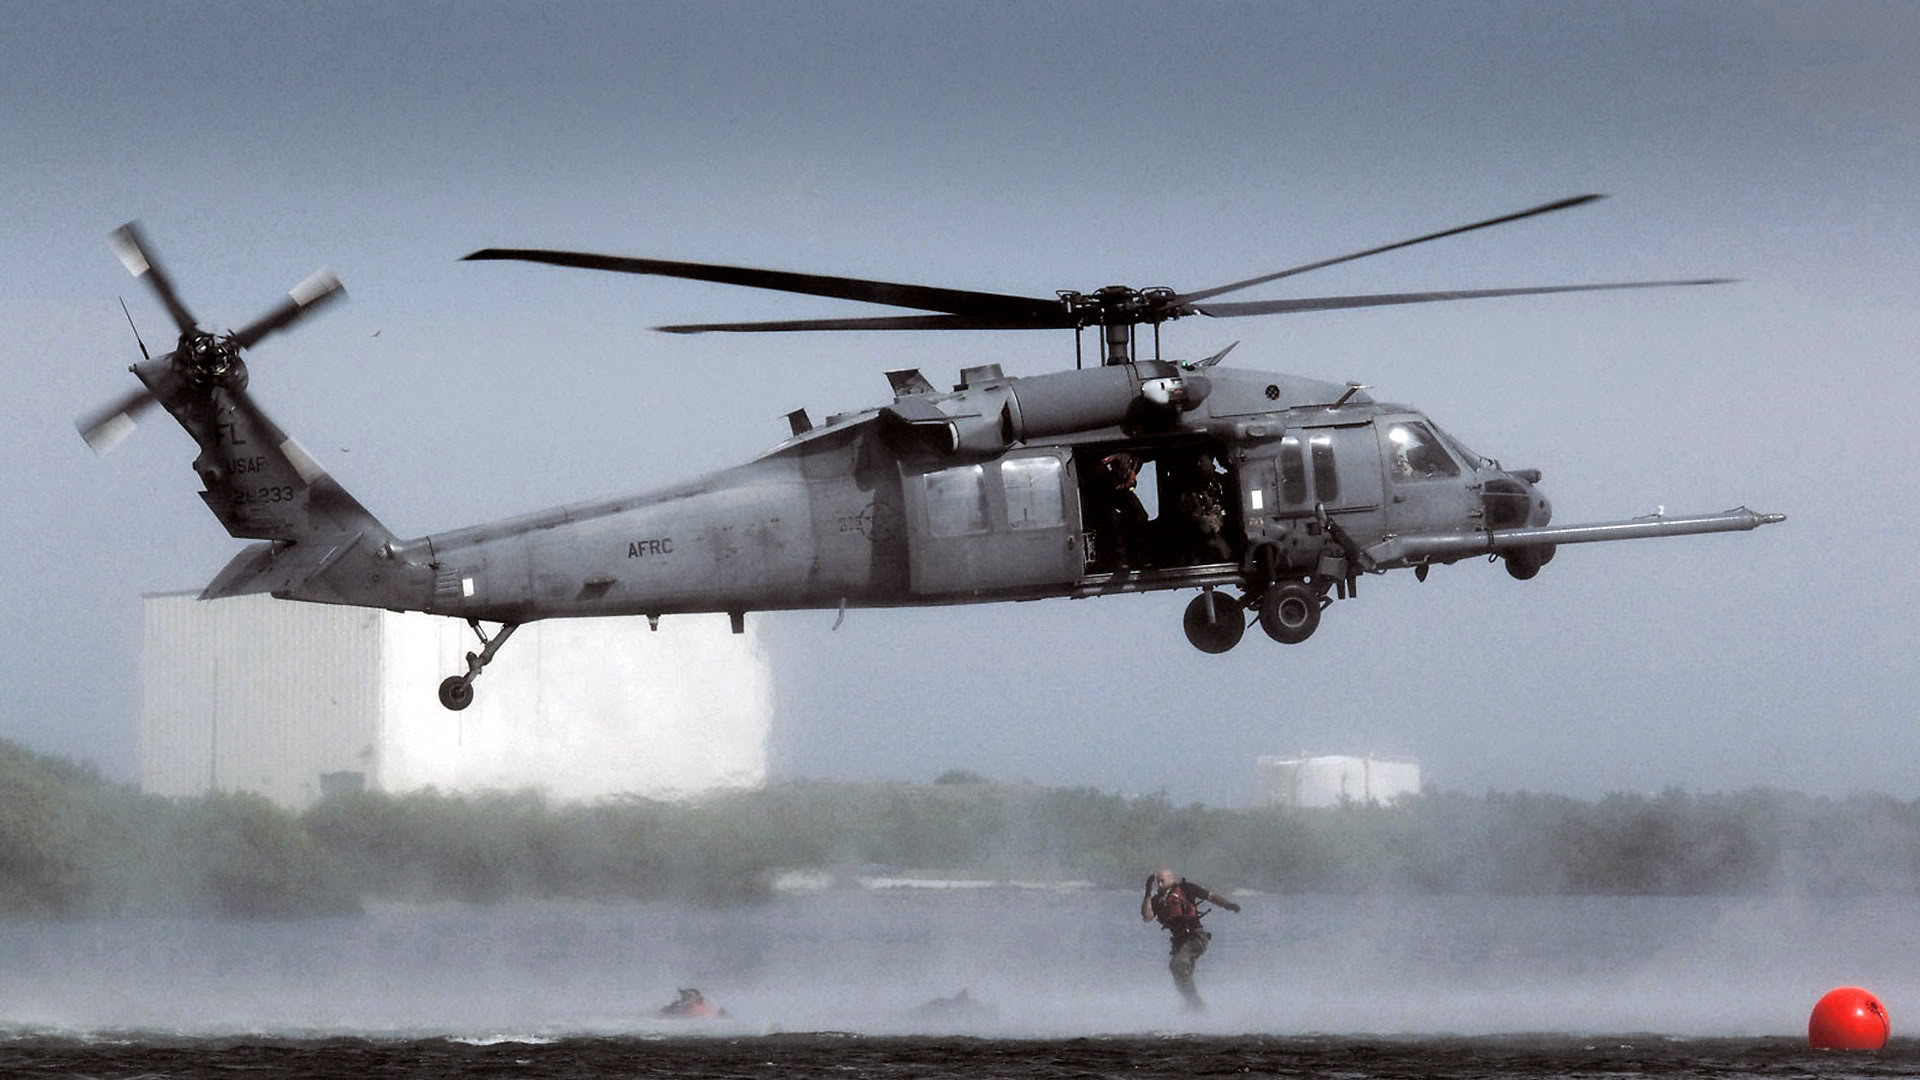 1920x1080 aircraft, military, helicopters, vehicles, UH-60 Knighthawk - Free Wallpaper  / WallpaperJam.com